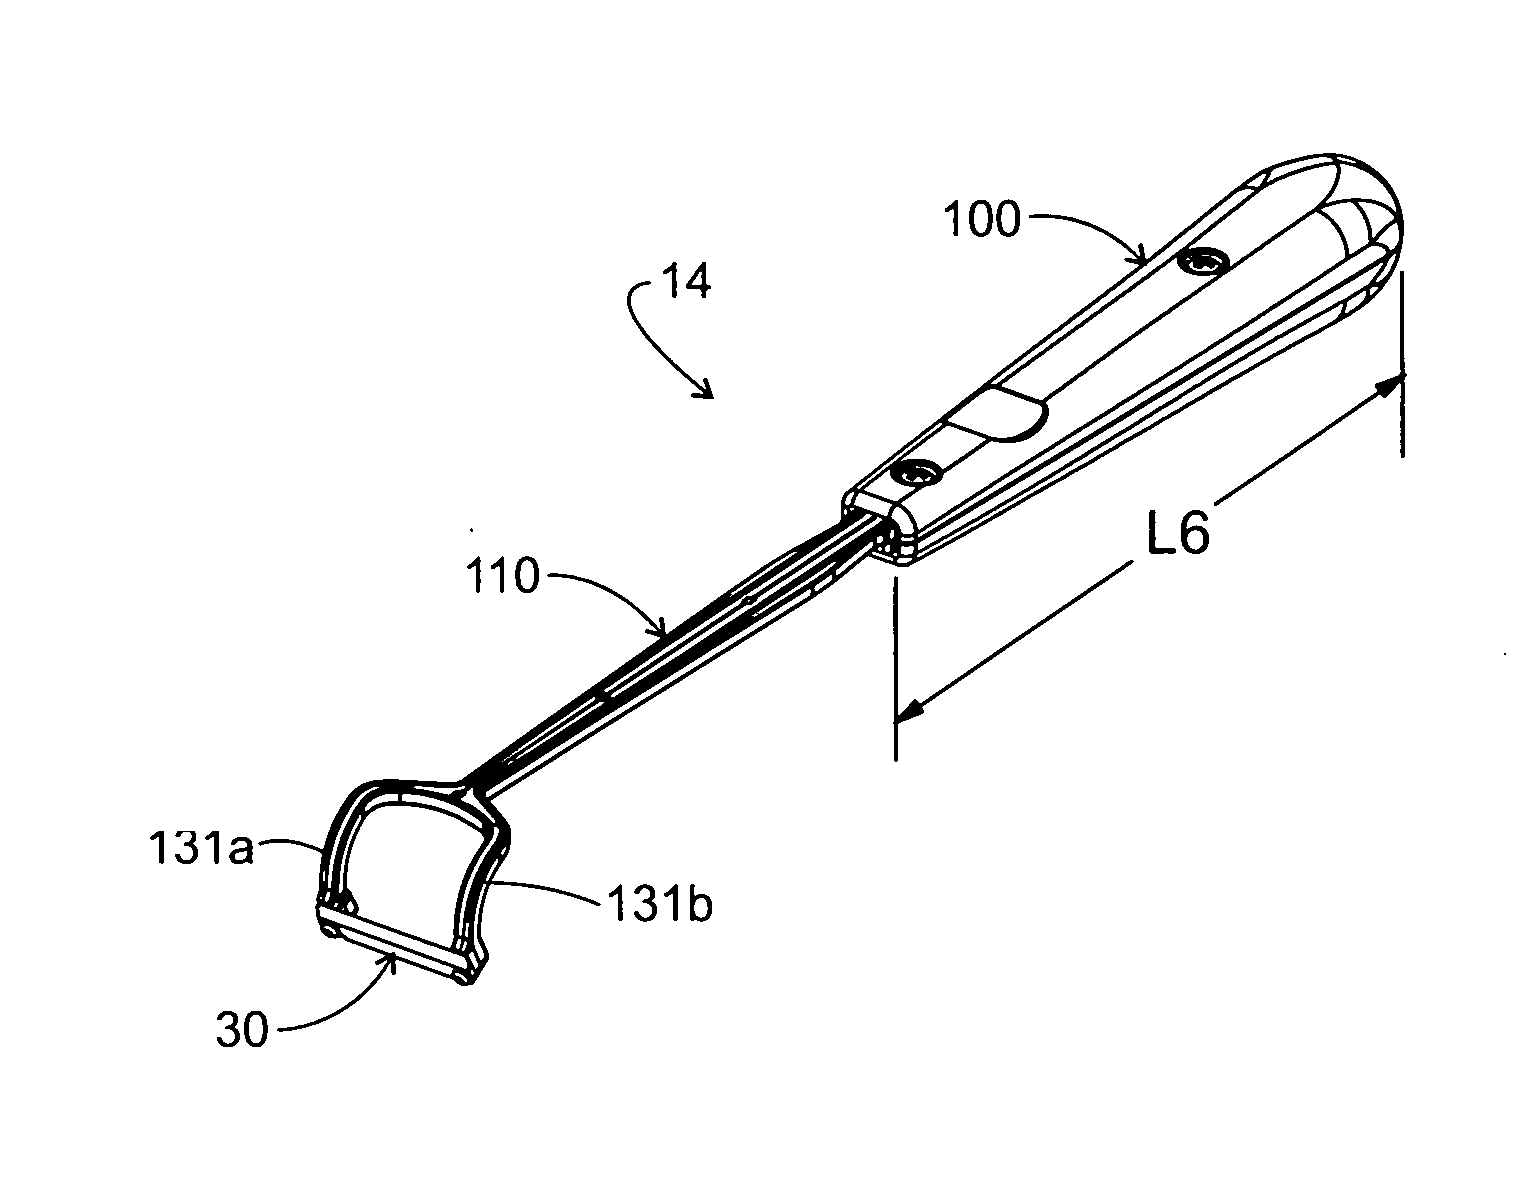 Apparatus, System and Method for Excision of Soft Tissue